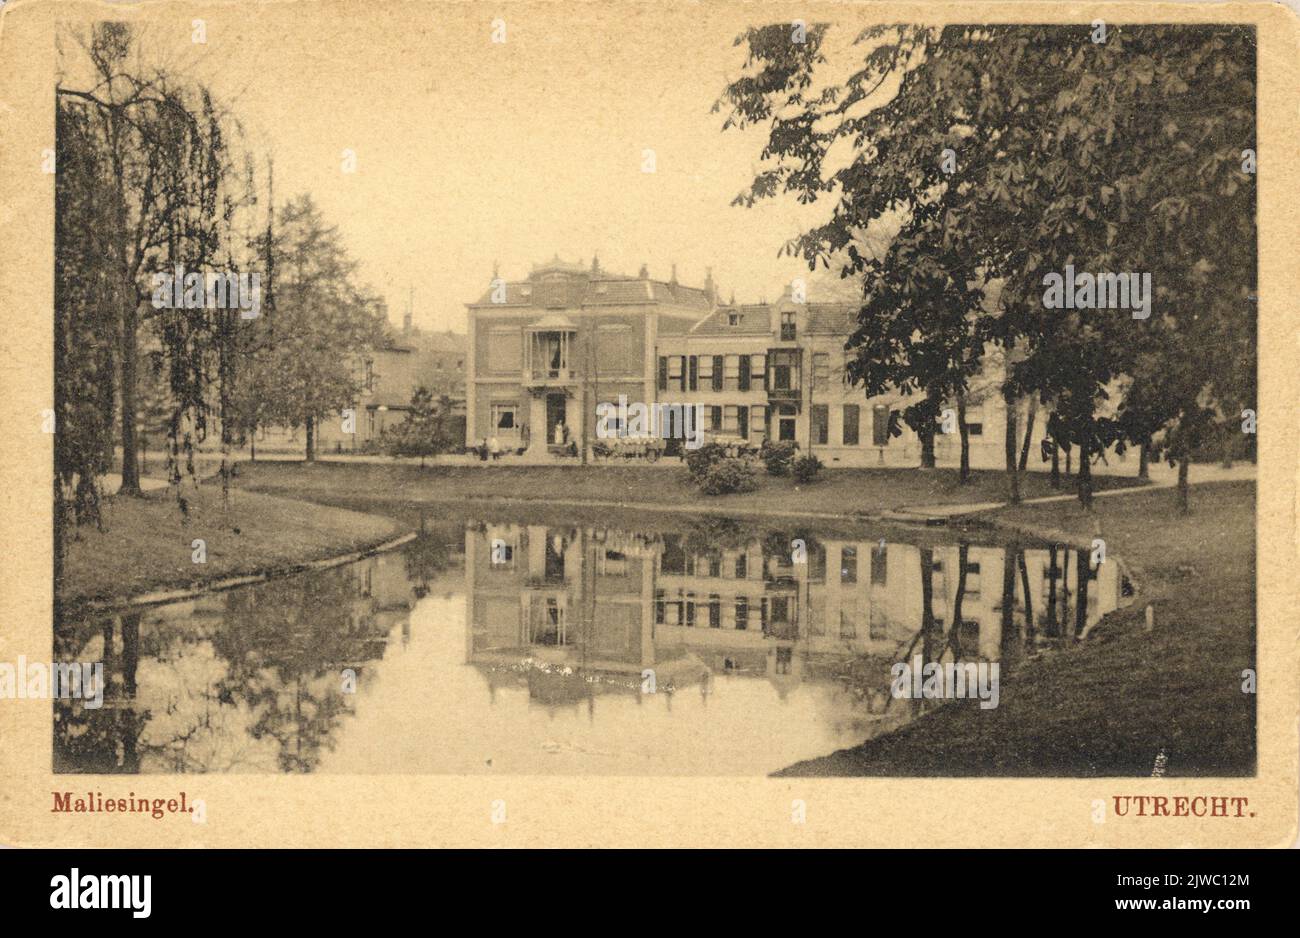 View of the Stadsbuitengracht in Utrecht from the south near the Plantsoen Lepelenburg with a few houses on the Maliesingel in the background. Stock Photo